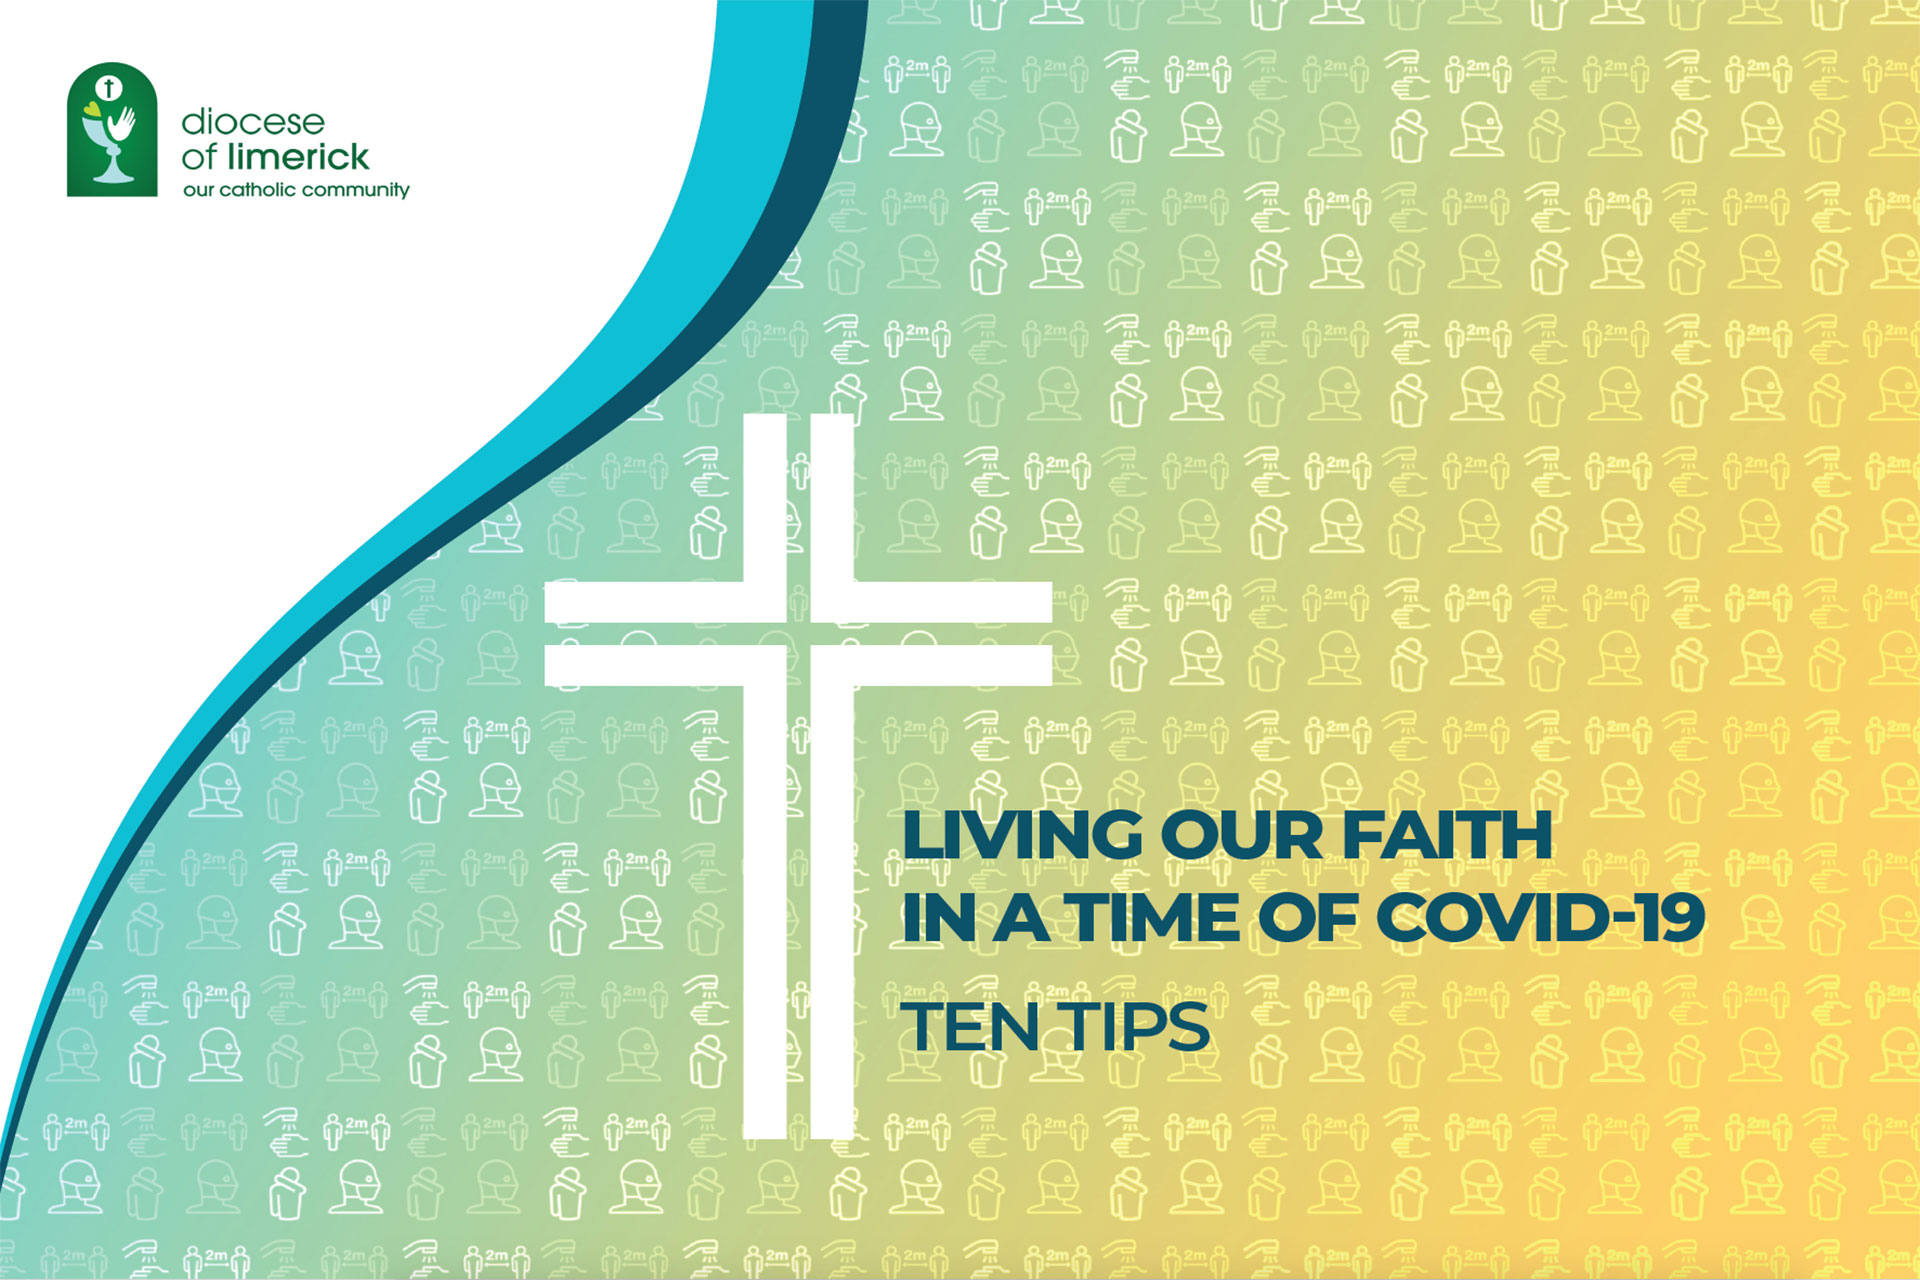 10 Tips for Living our Faith in COVID